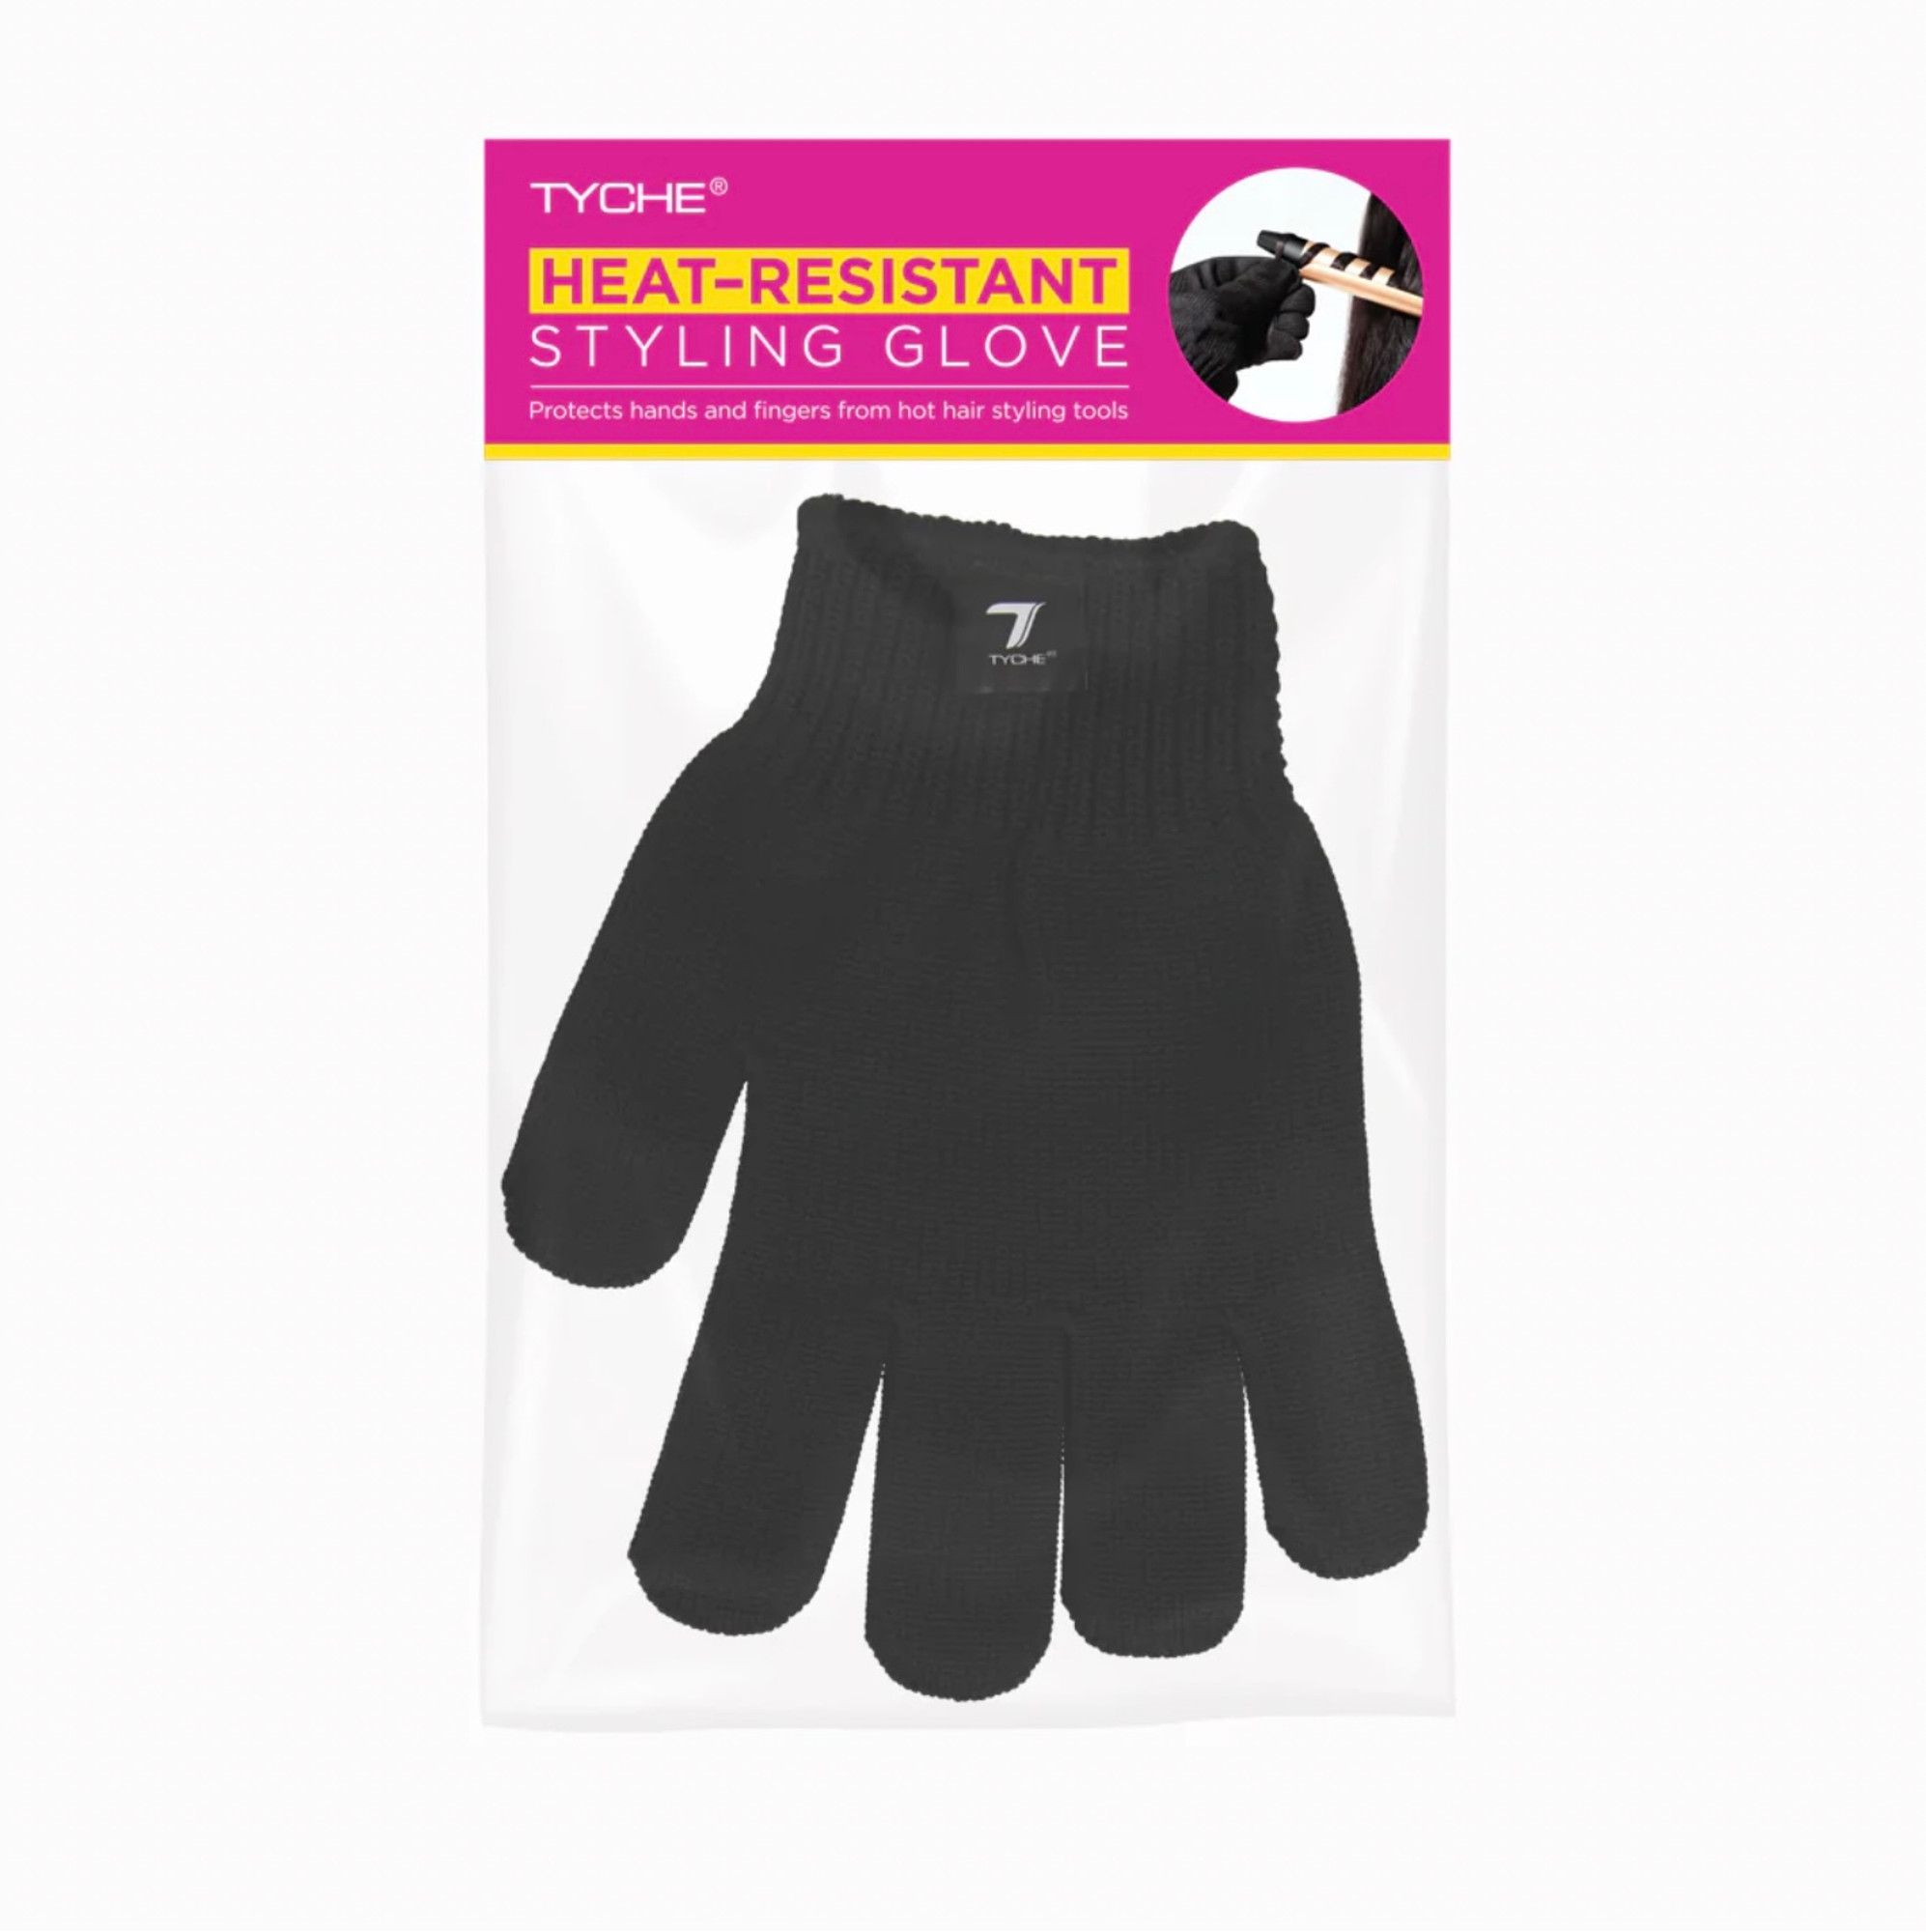 TYCHE Heat-Resistant Styling Glove